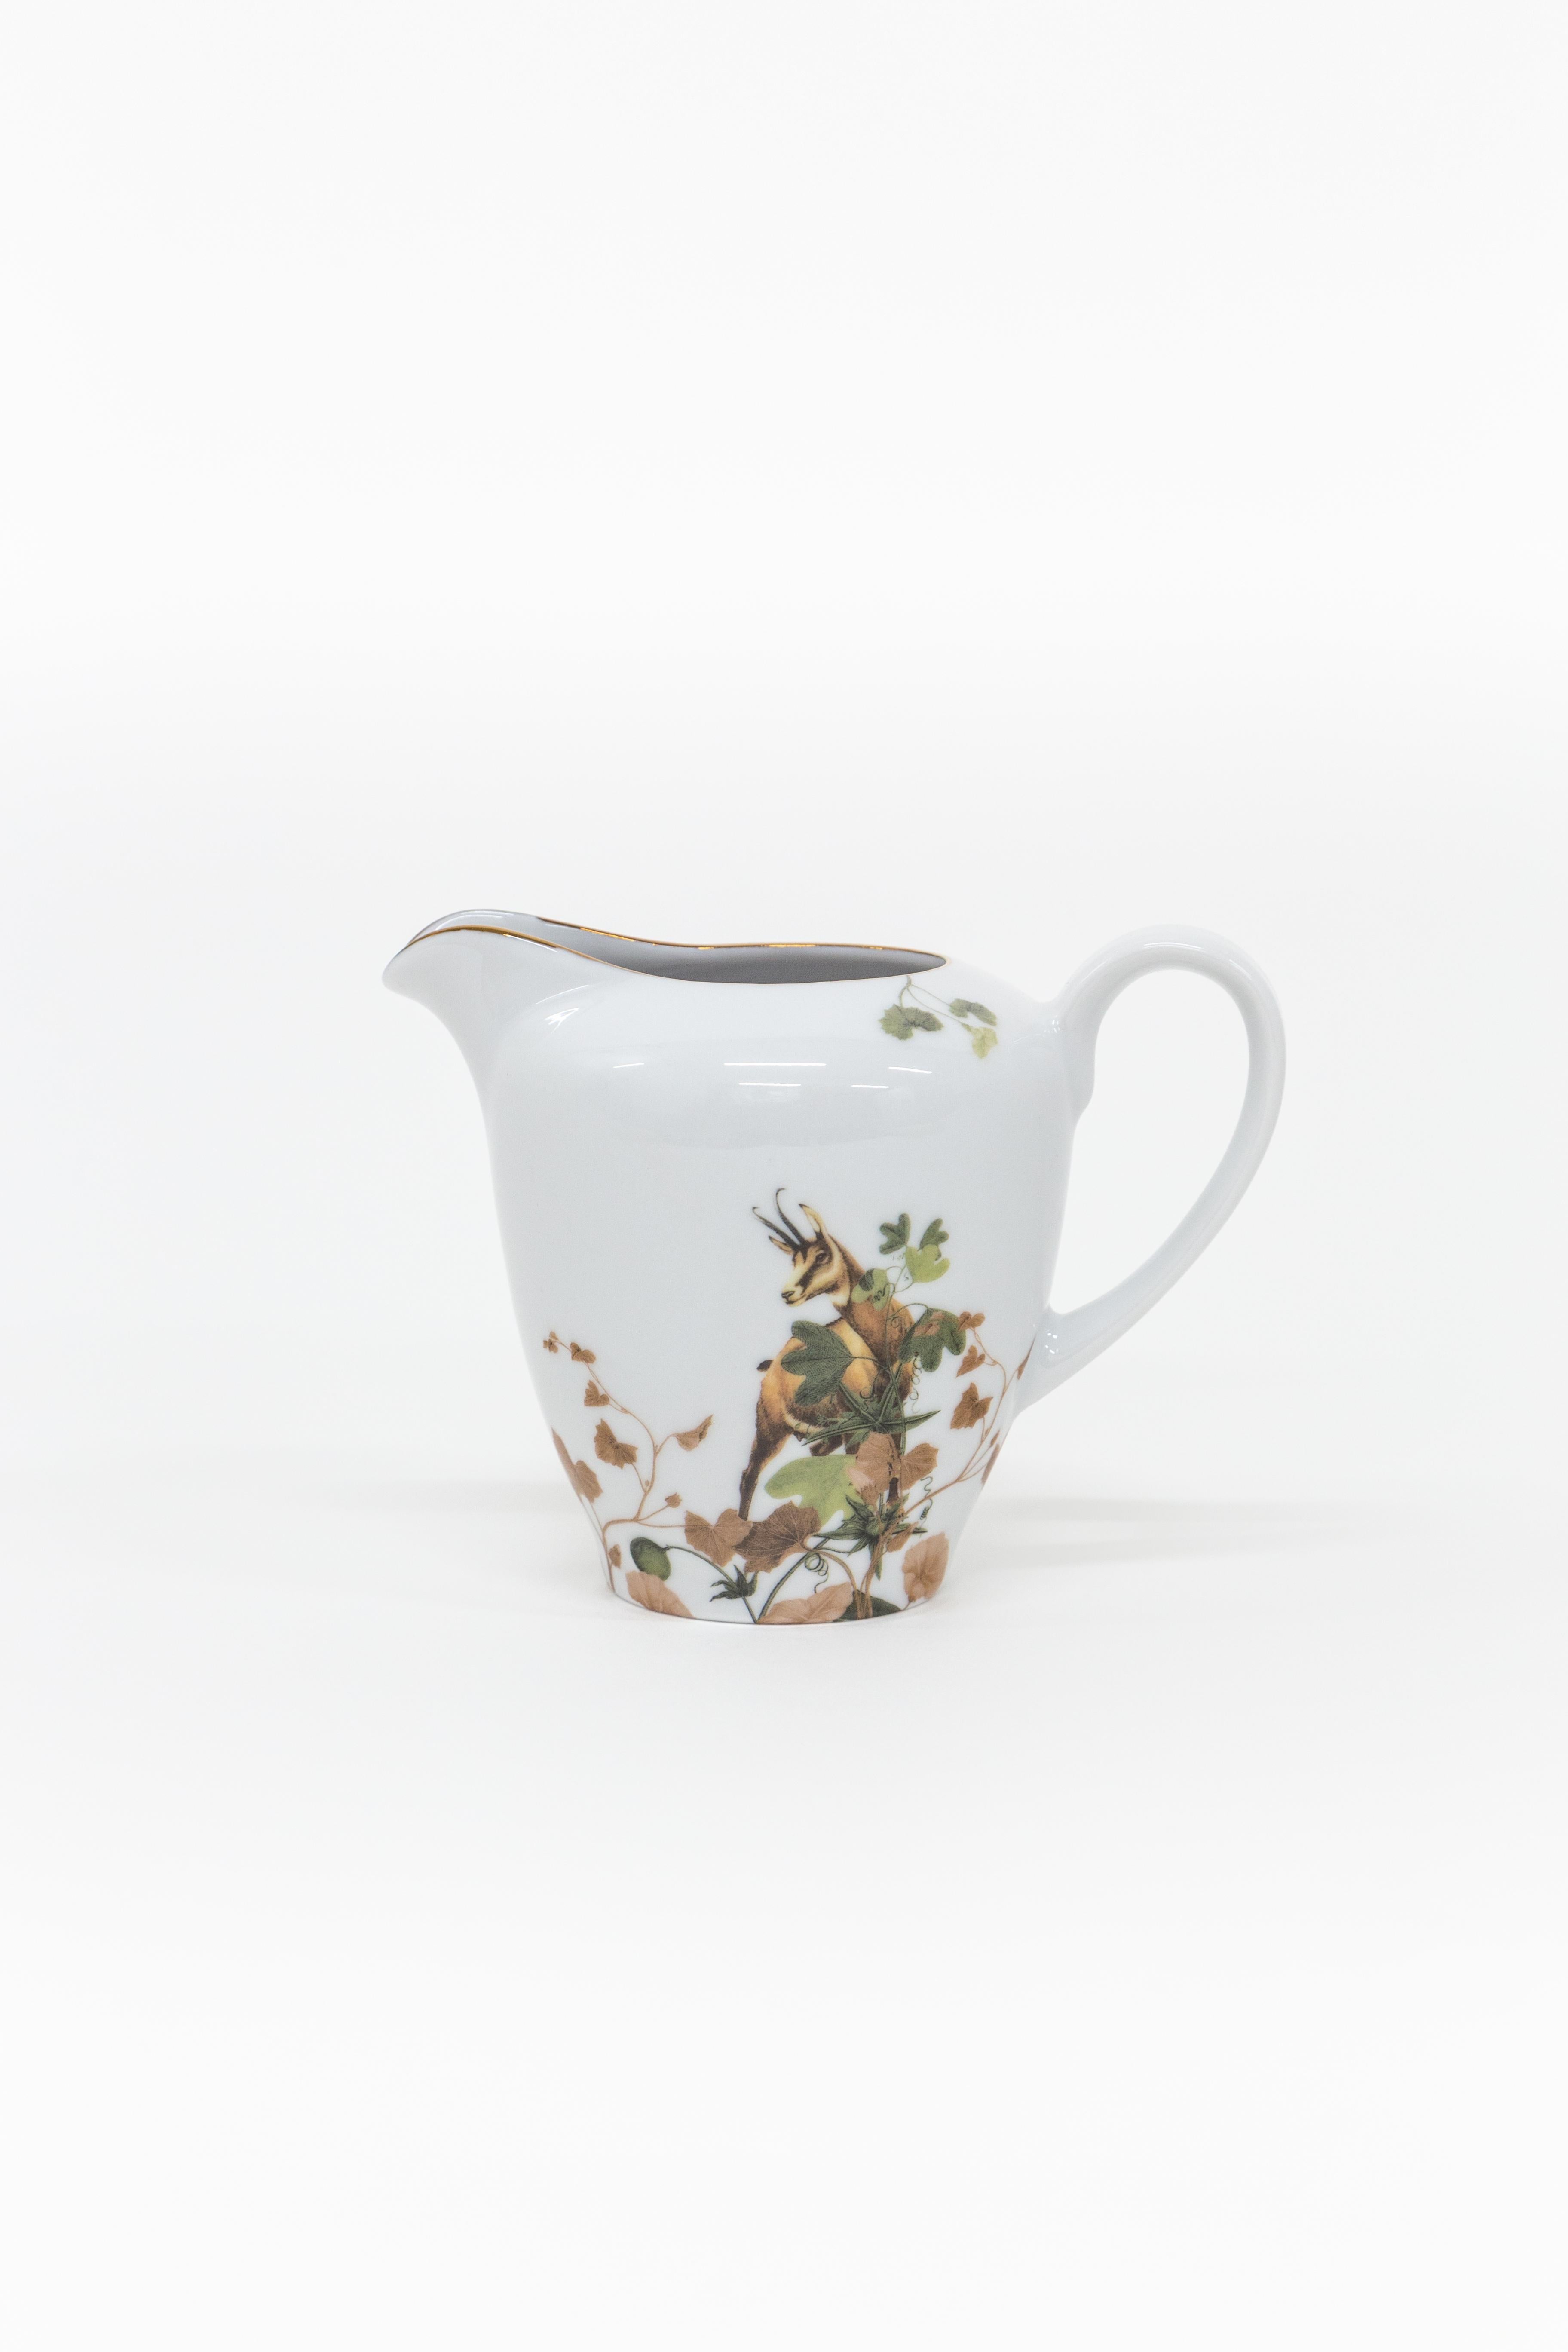 This Tea Time Set is part of the Mont Blanc Porcelain collection by Grand Tour by Vito Nesta, Inspired by the highest mountain of the Alps, the Mont Blanc, this collection is a photography of the changing seasons. Winter is here and all the animals